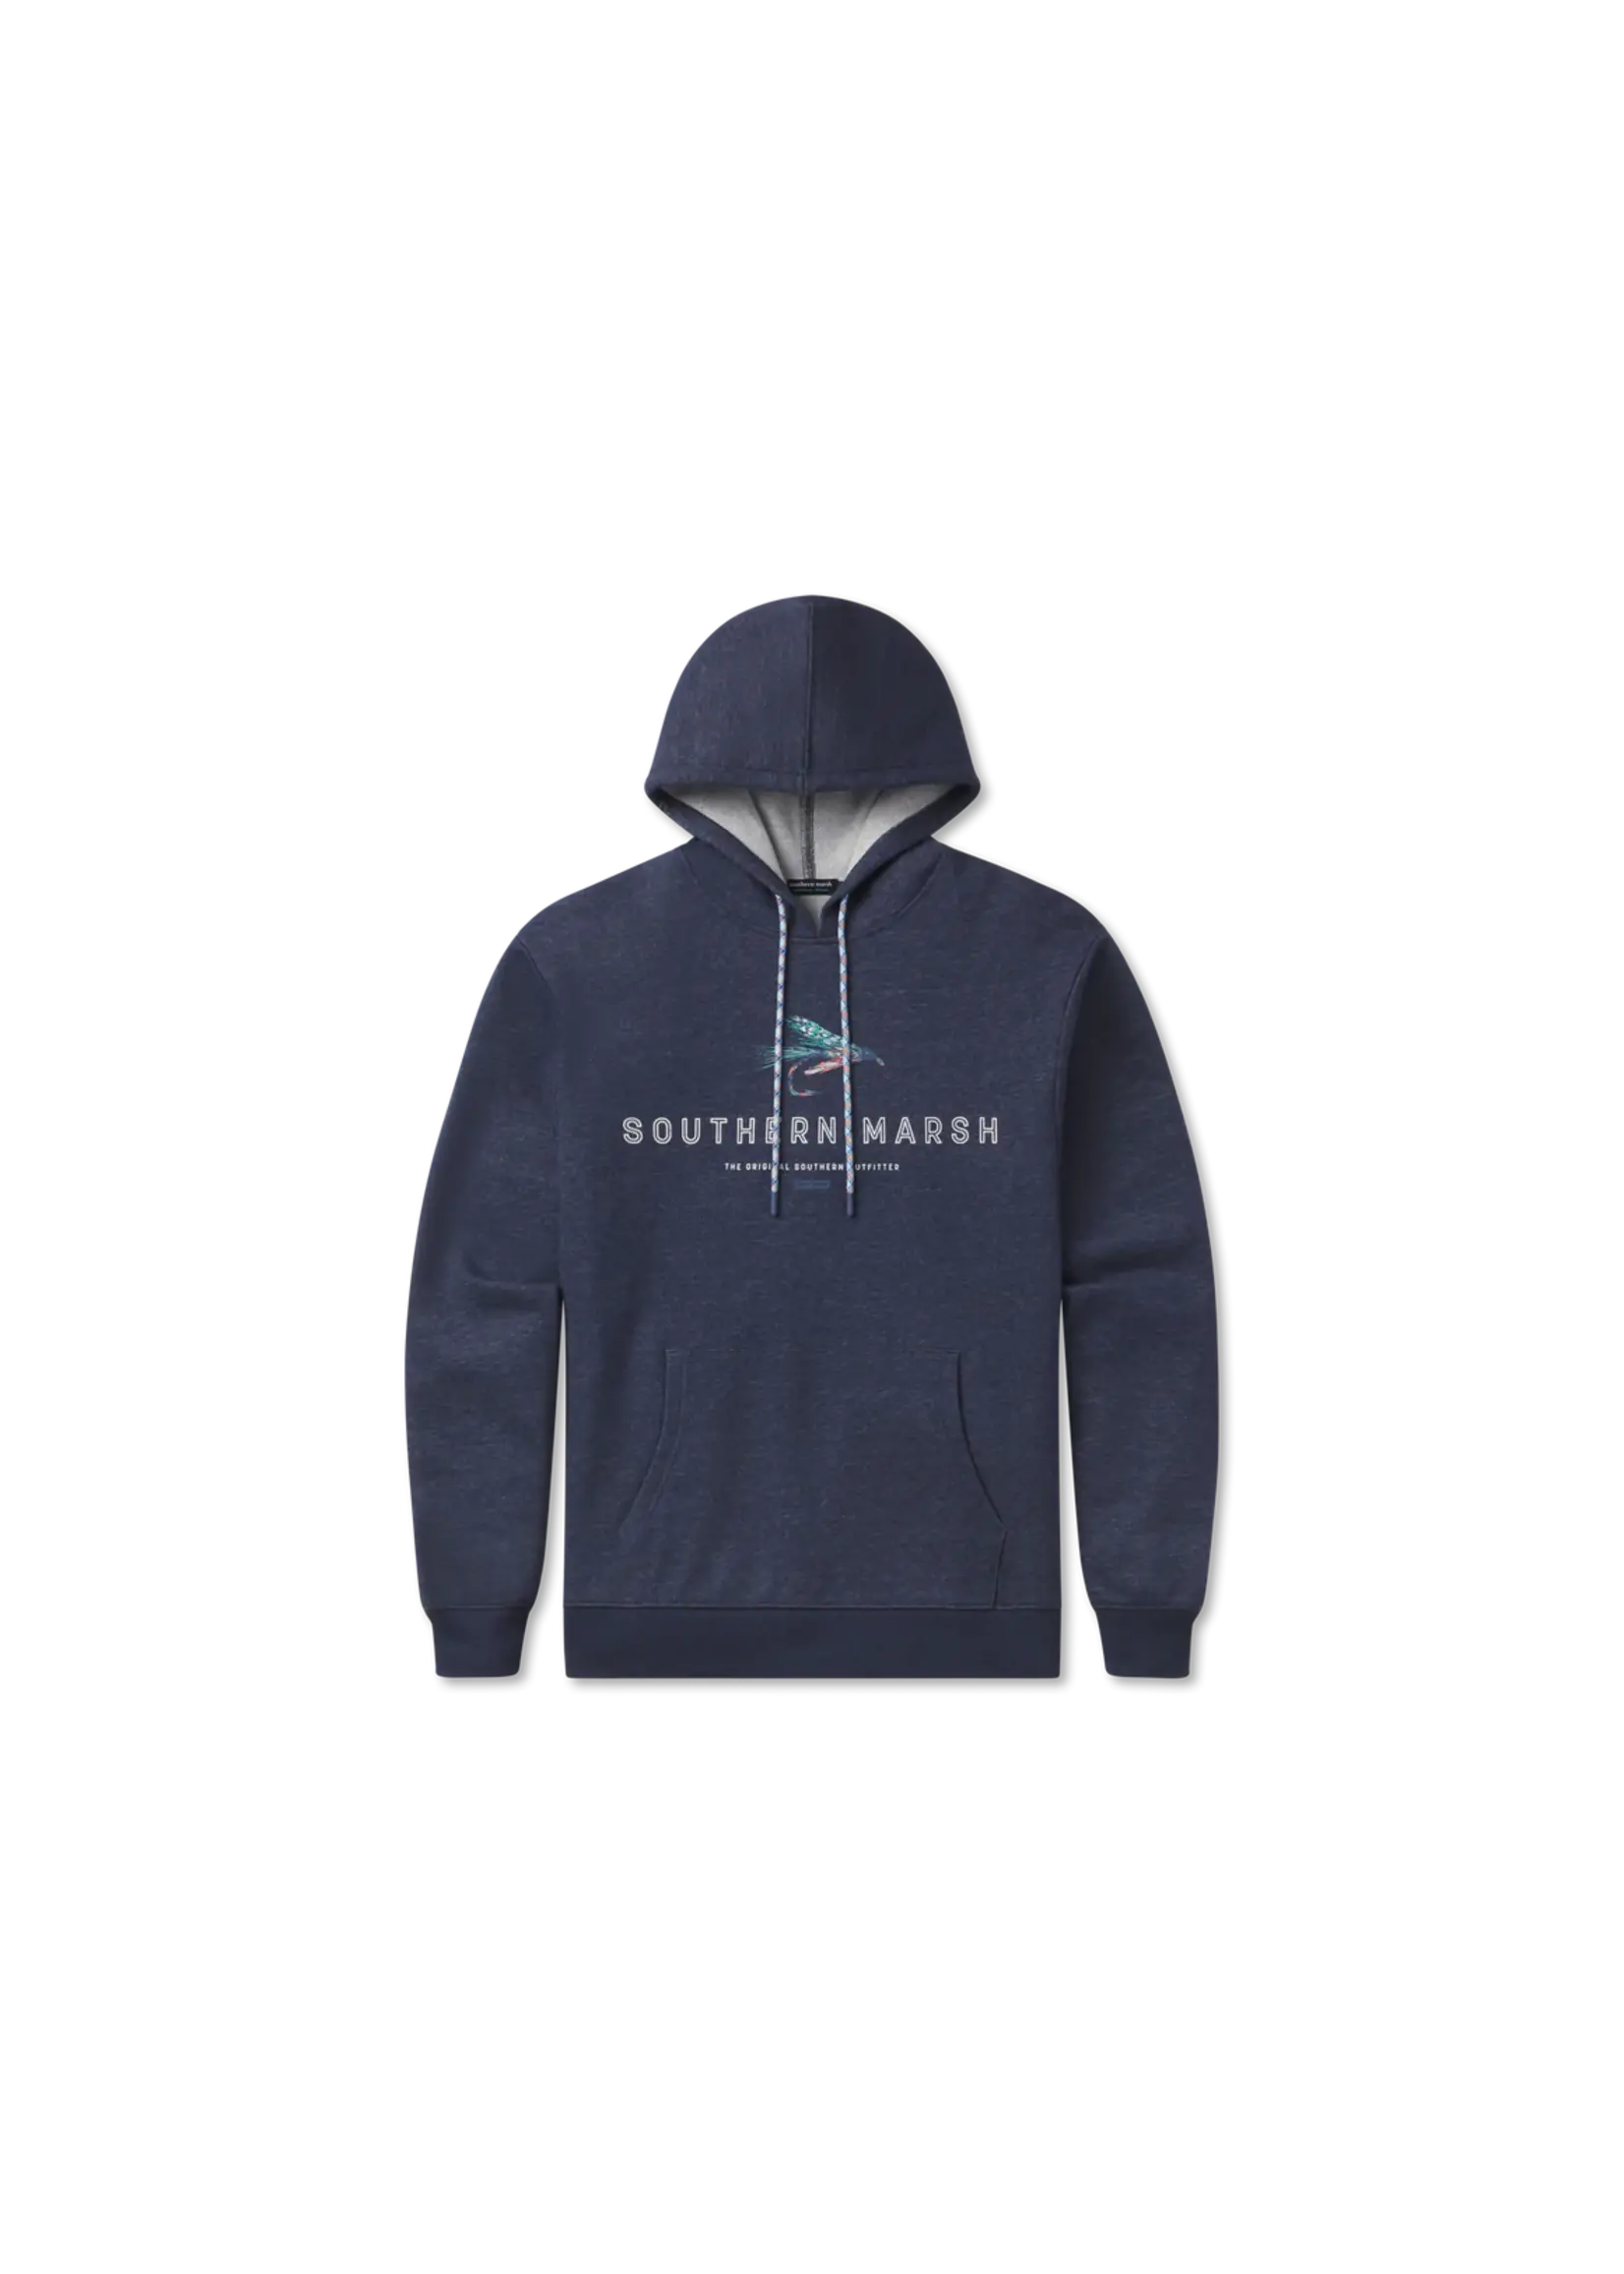 Southern Marsh Hecho Heather Hoodie - Fly Outlines